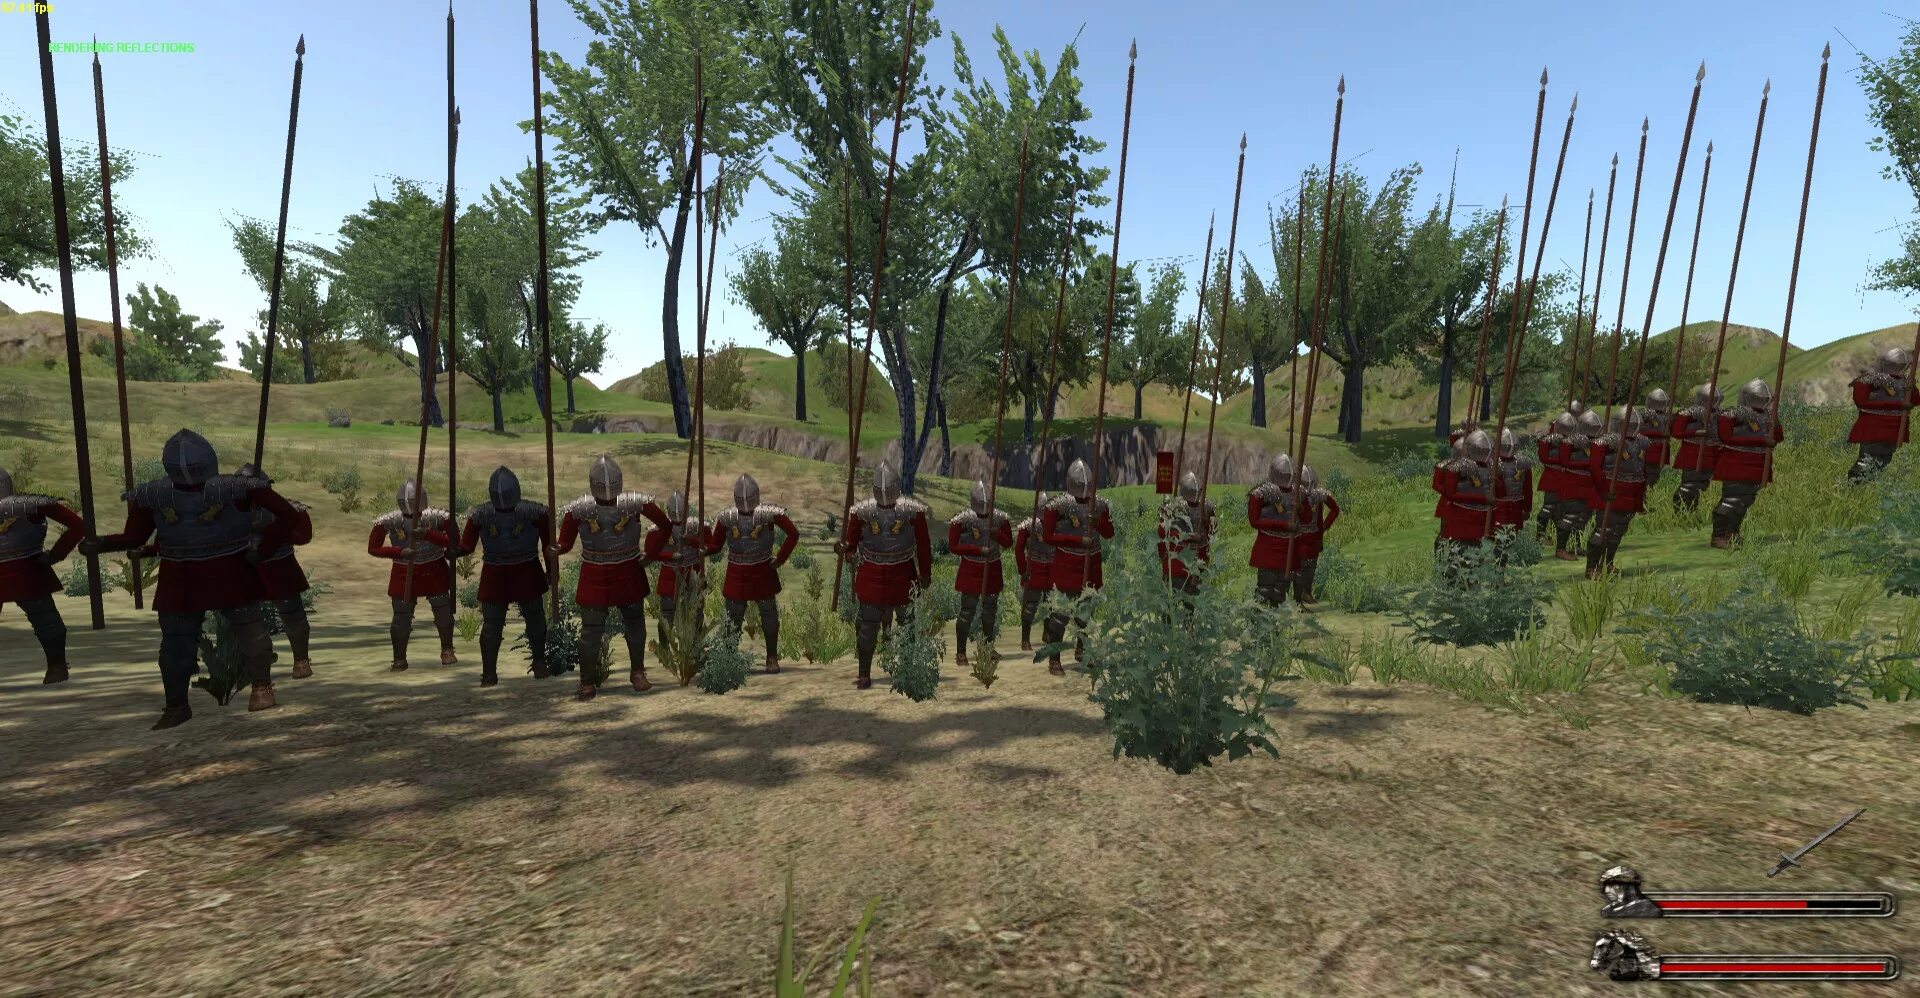 Mount and Blade Warband 18 век. Маунт энд блейд Русь 13 век. Mount and Blade Warband 19 век. Warband мод про Русь.